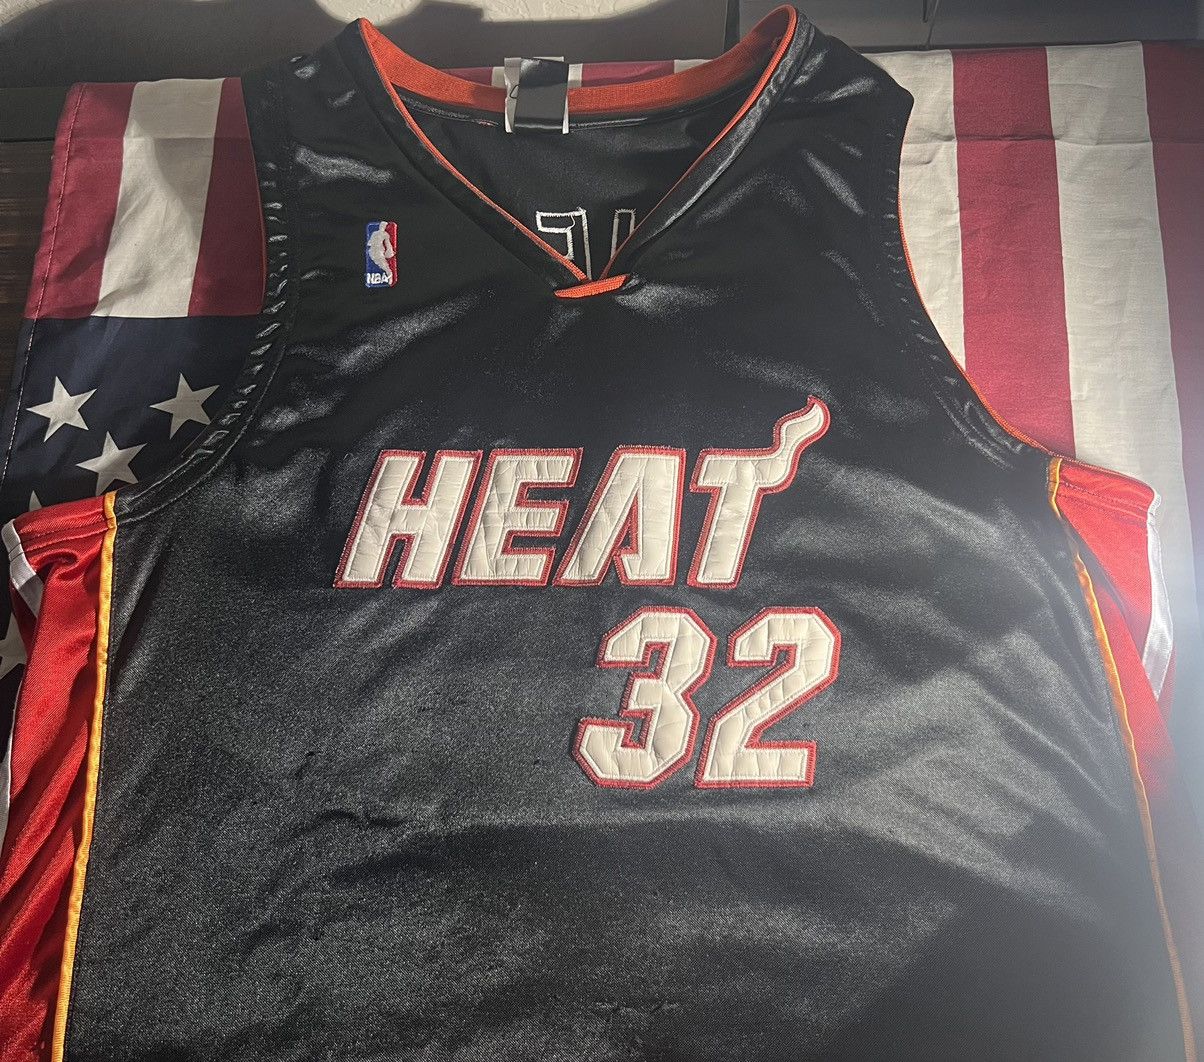 Vintage Miami Heat Shaquille O’Neal jersey Size US L / EU 52-54 / 3 - 1 Preview